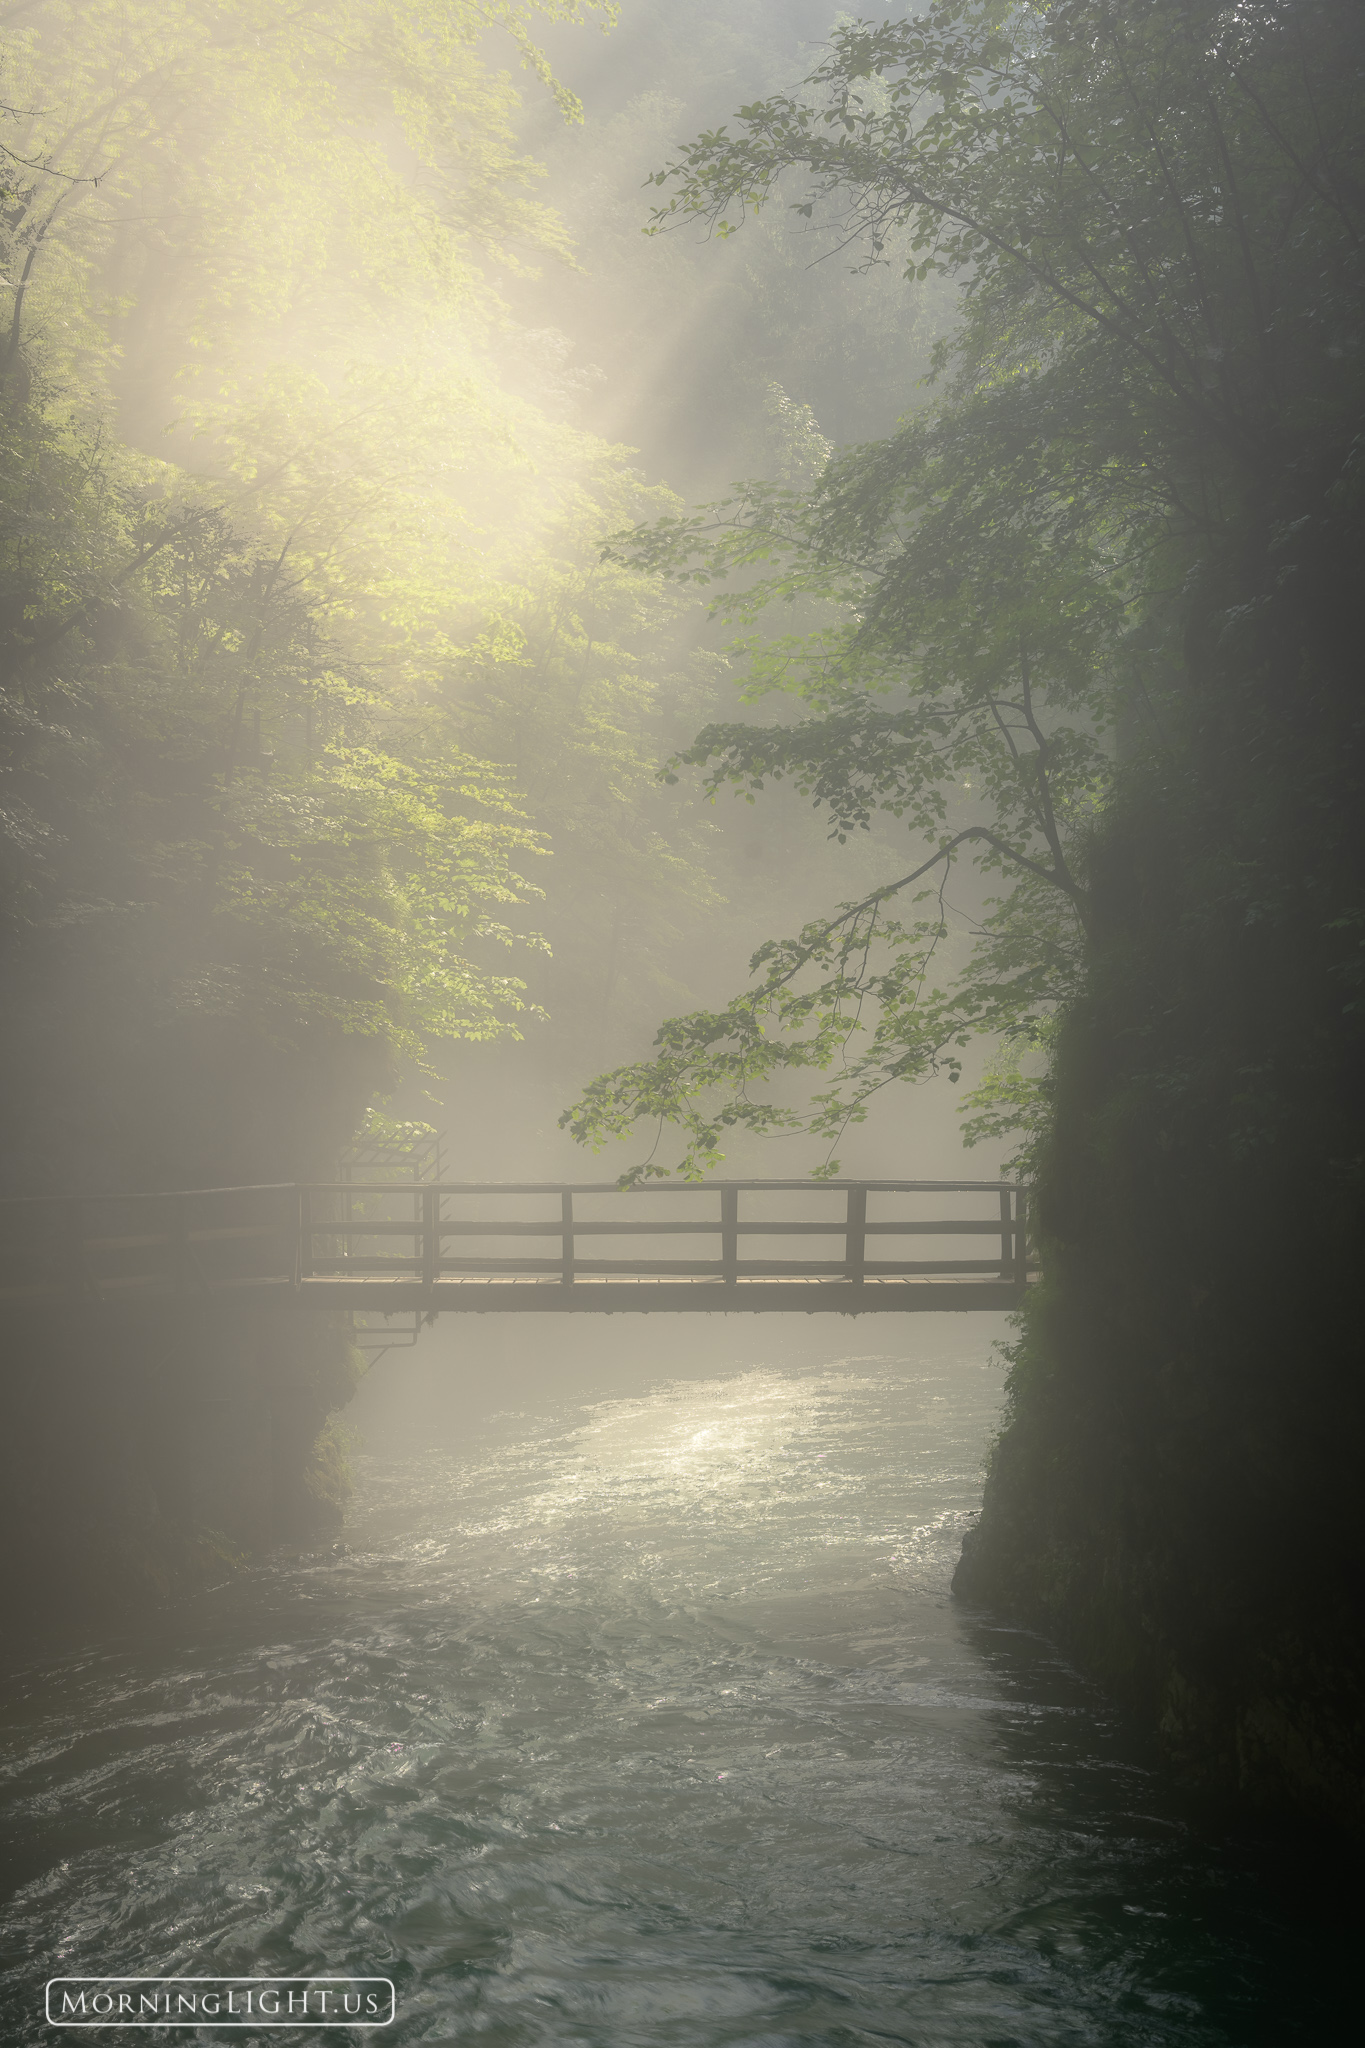 A wooden bridge spans a steep gorge which is teeming with life as the sun's rays begin to reach down trying to touch the water...